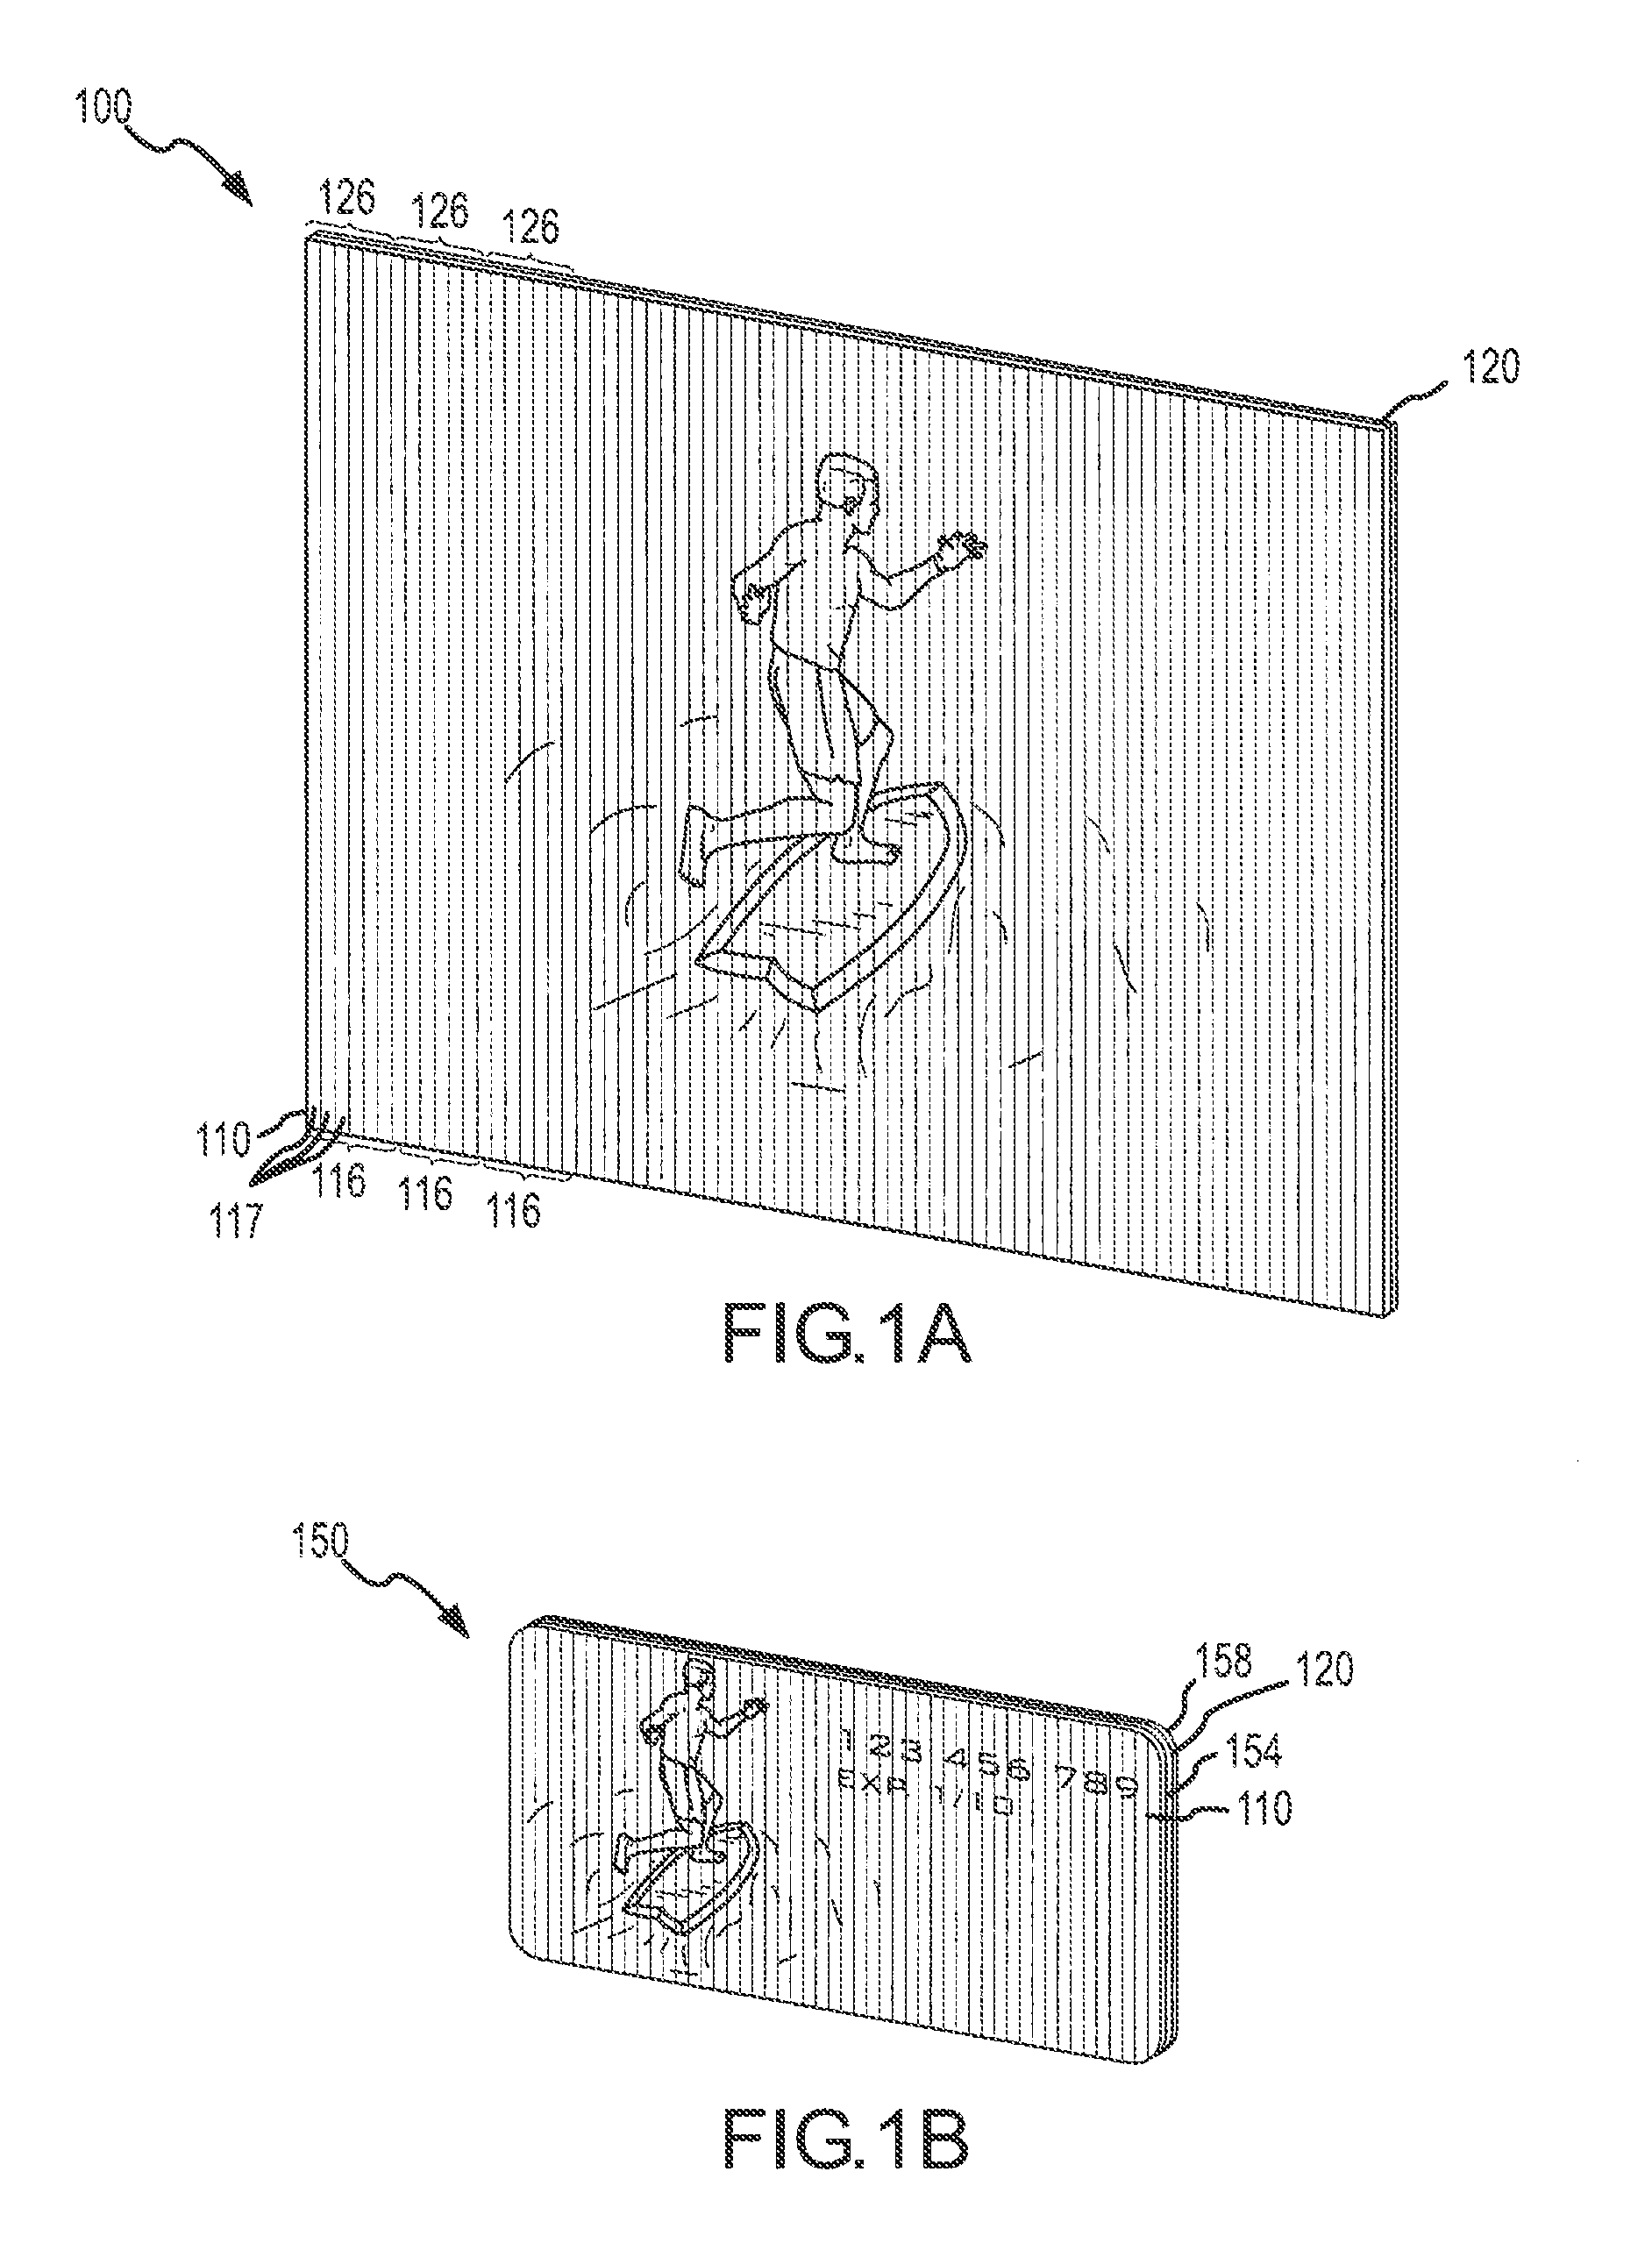 Manufacture of display devices with ultrathin lins arrays for viewing interlaced images